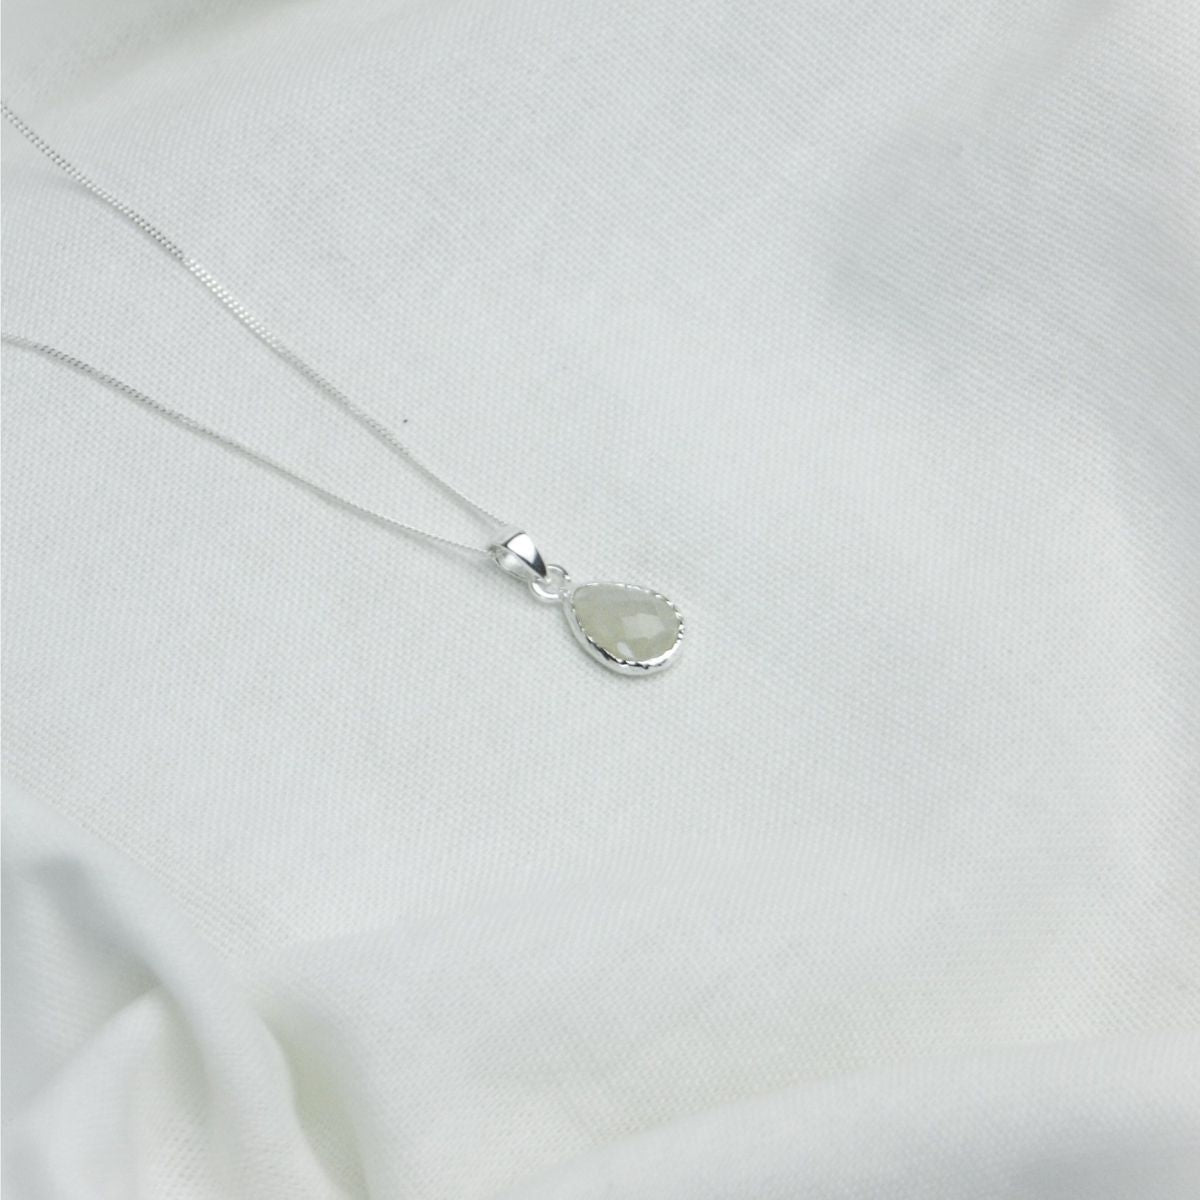 a white pendant necklace on  a white cloth